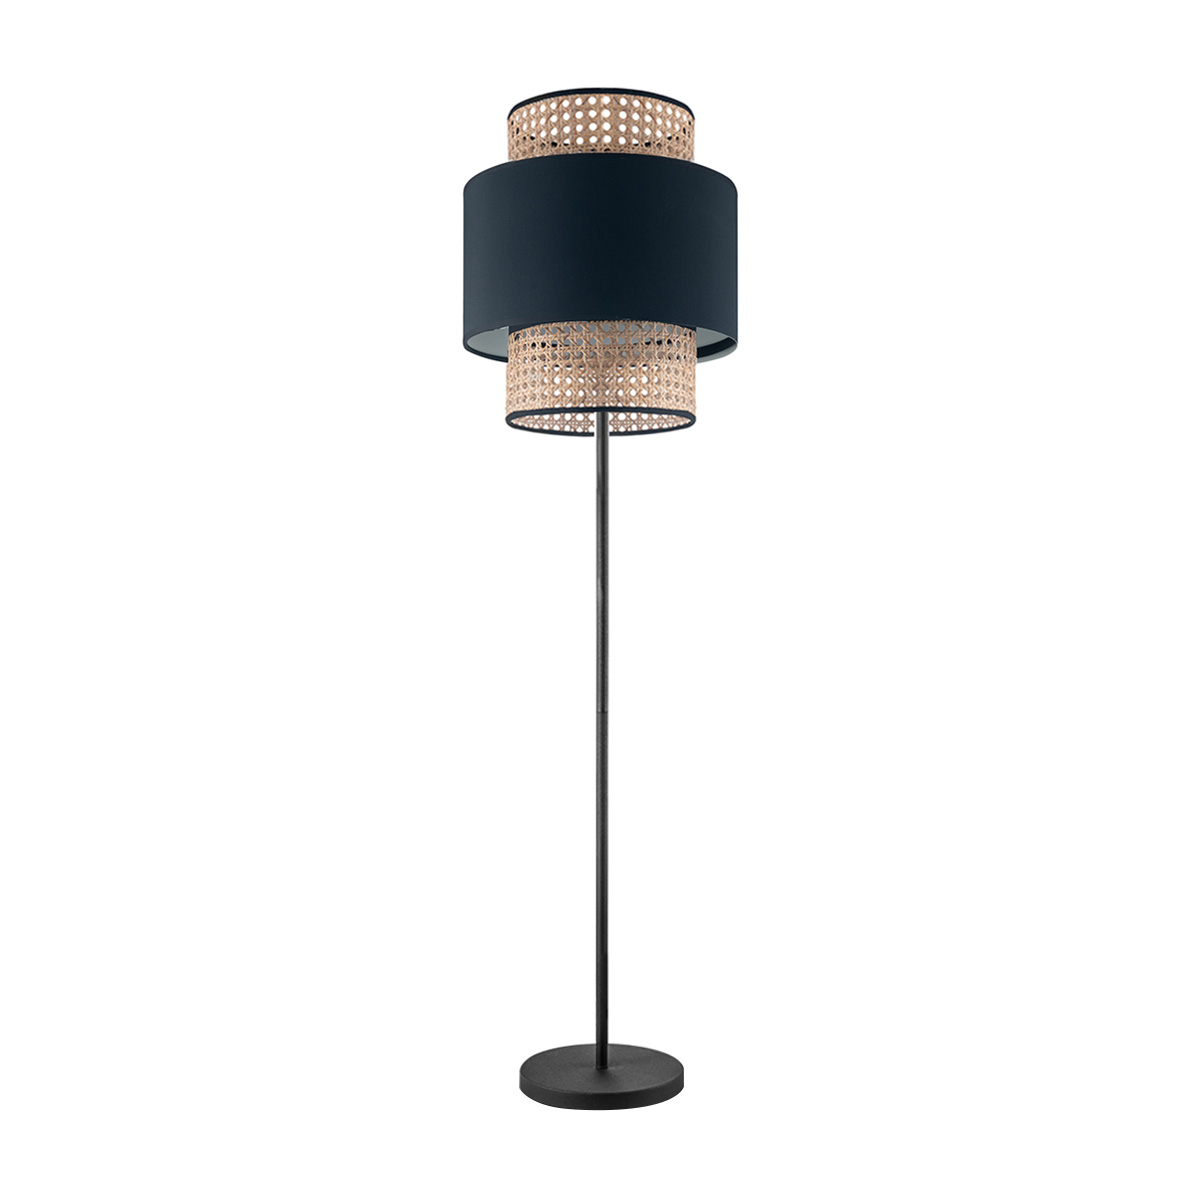 Tangla lighting - TLF7013-30BL - LED floor lamp 1 Light - metal and natural rattan and TC fabric in natural and blue - bright - E27